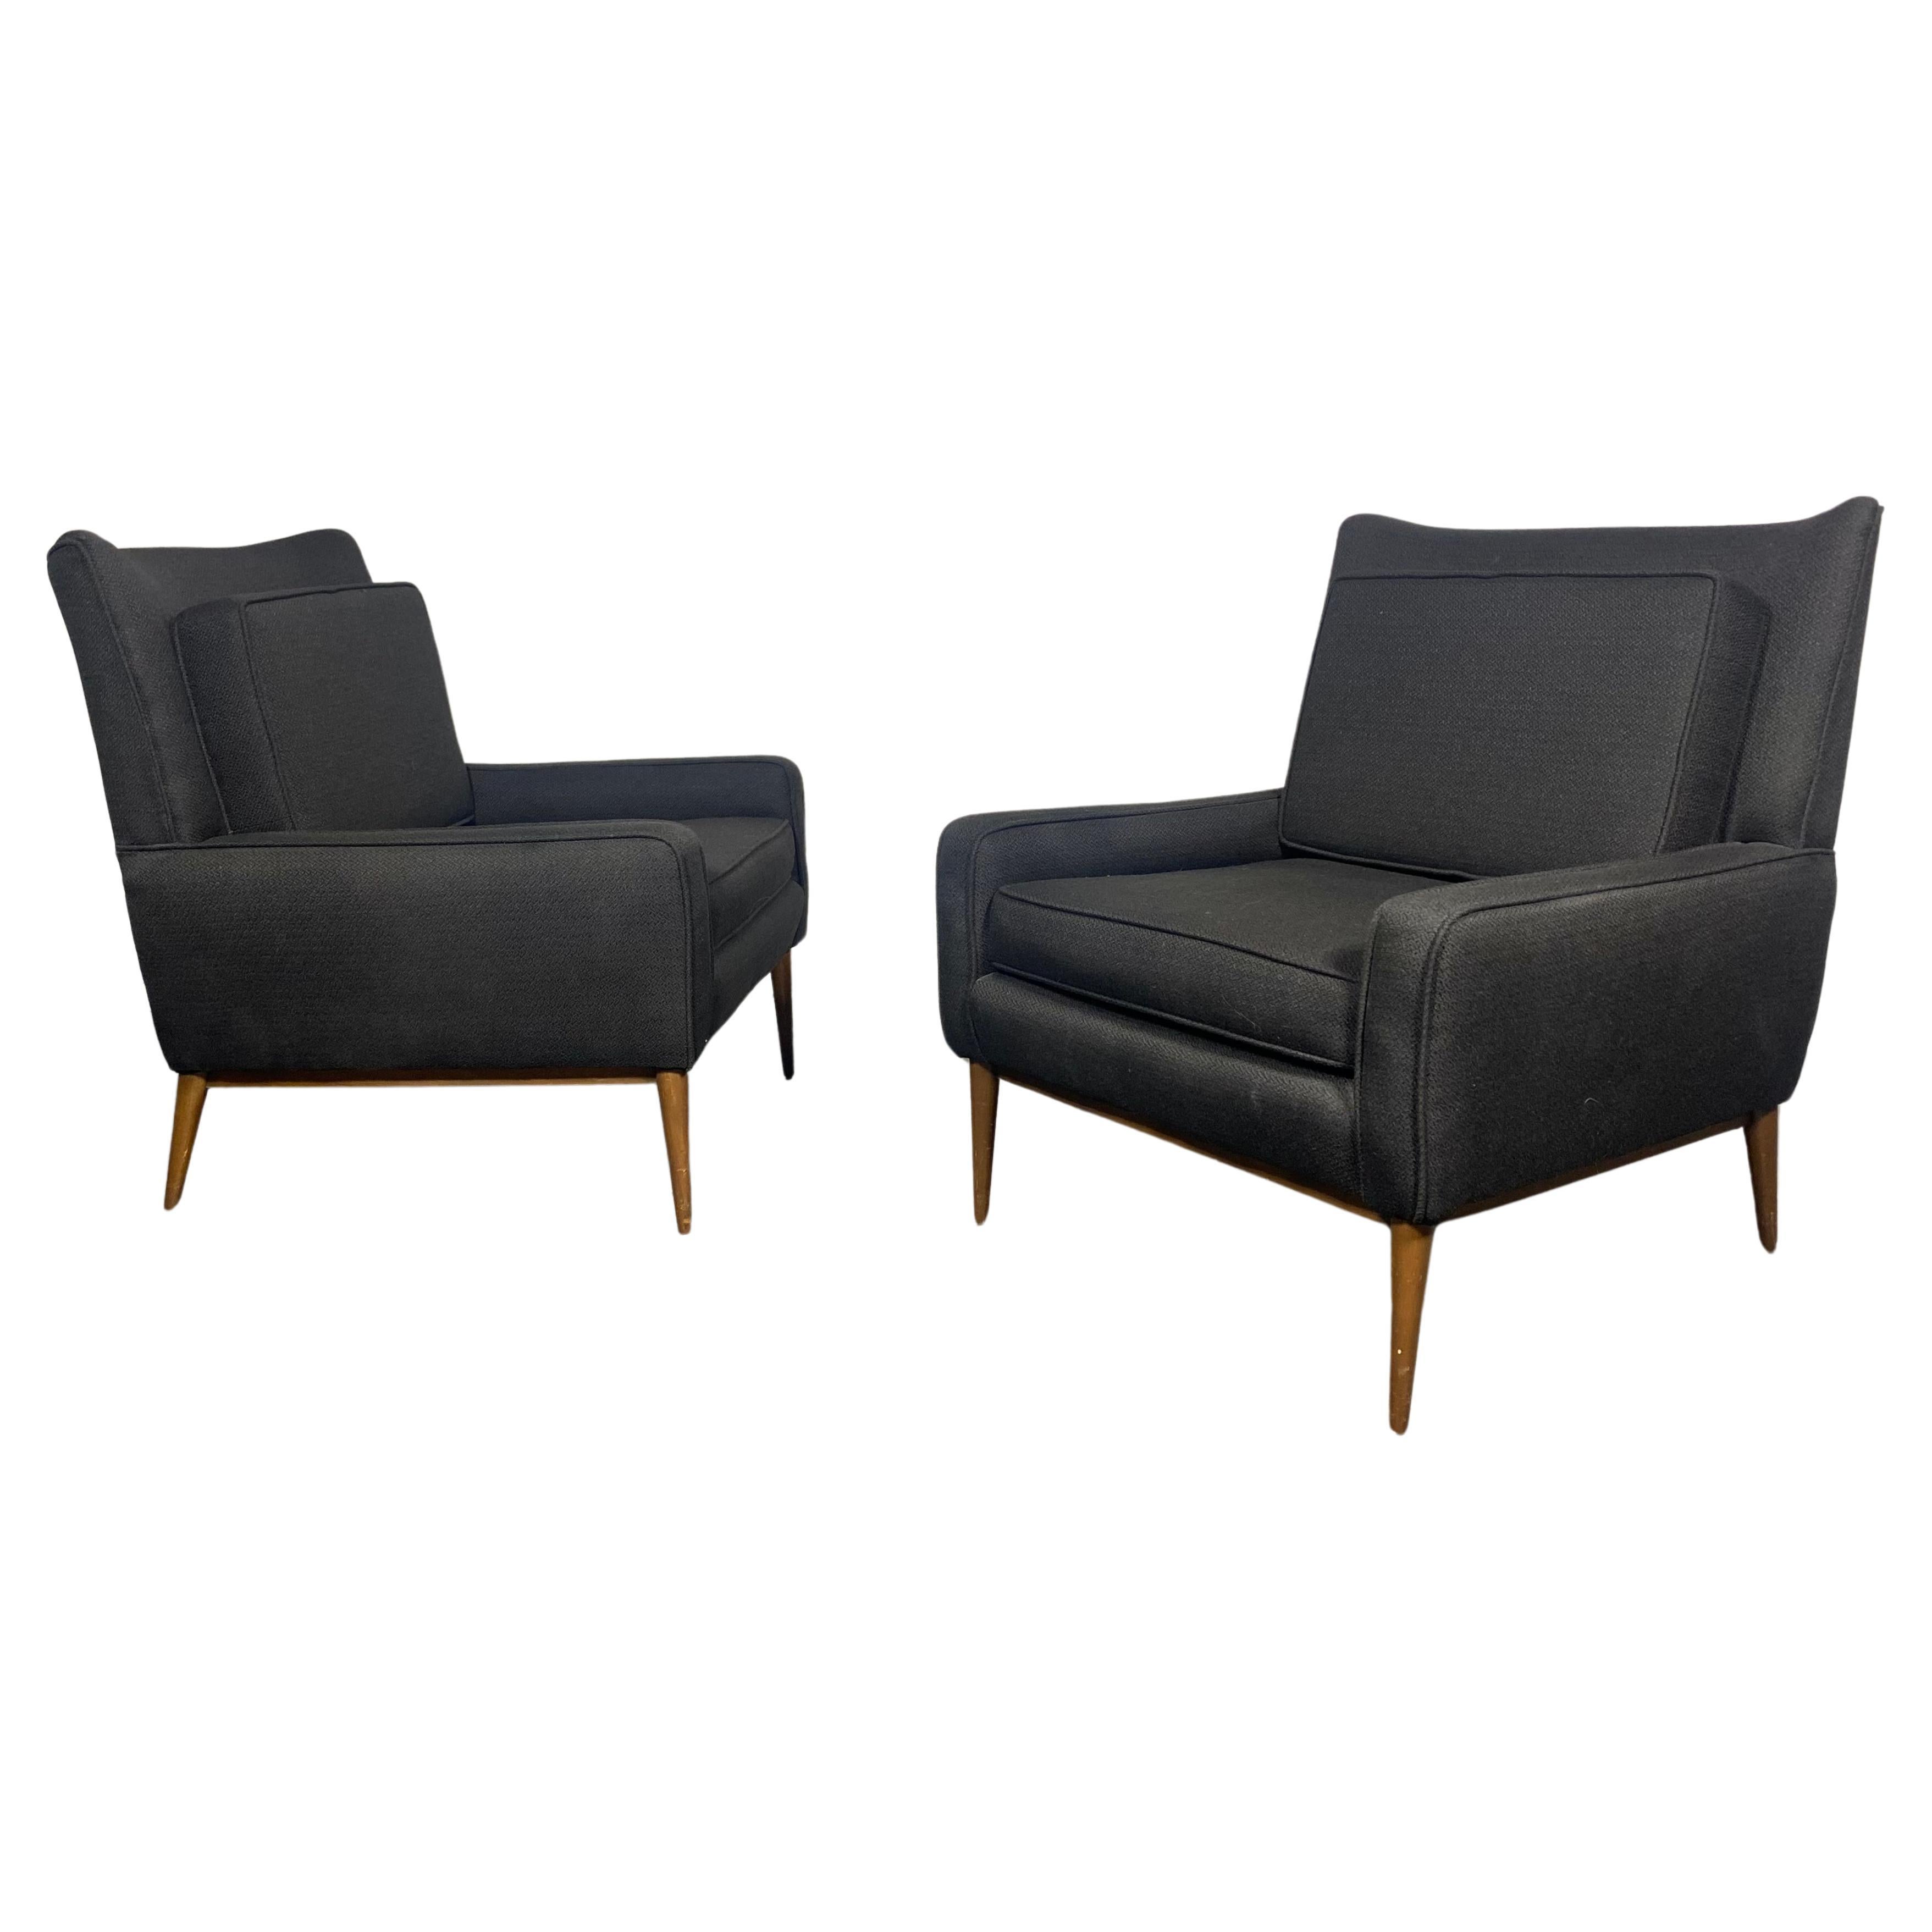 Classic Pair Modernist Lounge Chairs attributed to Paul McCobb / Directional For Sale